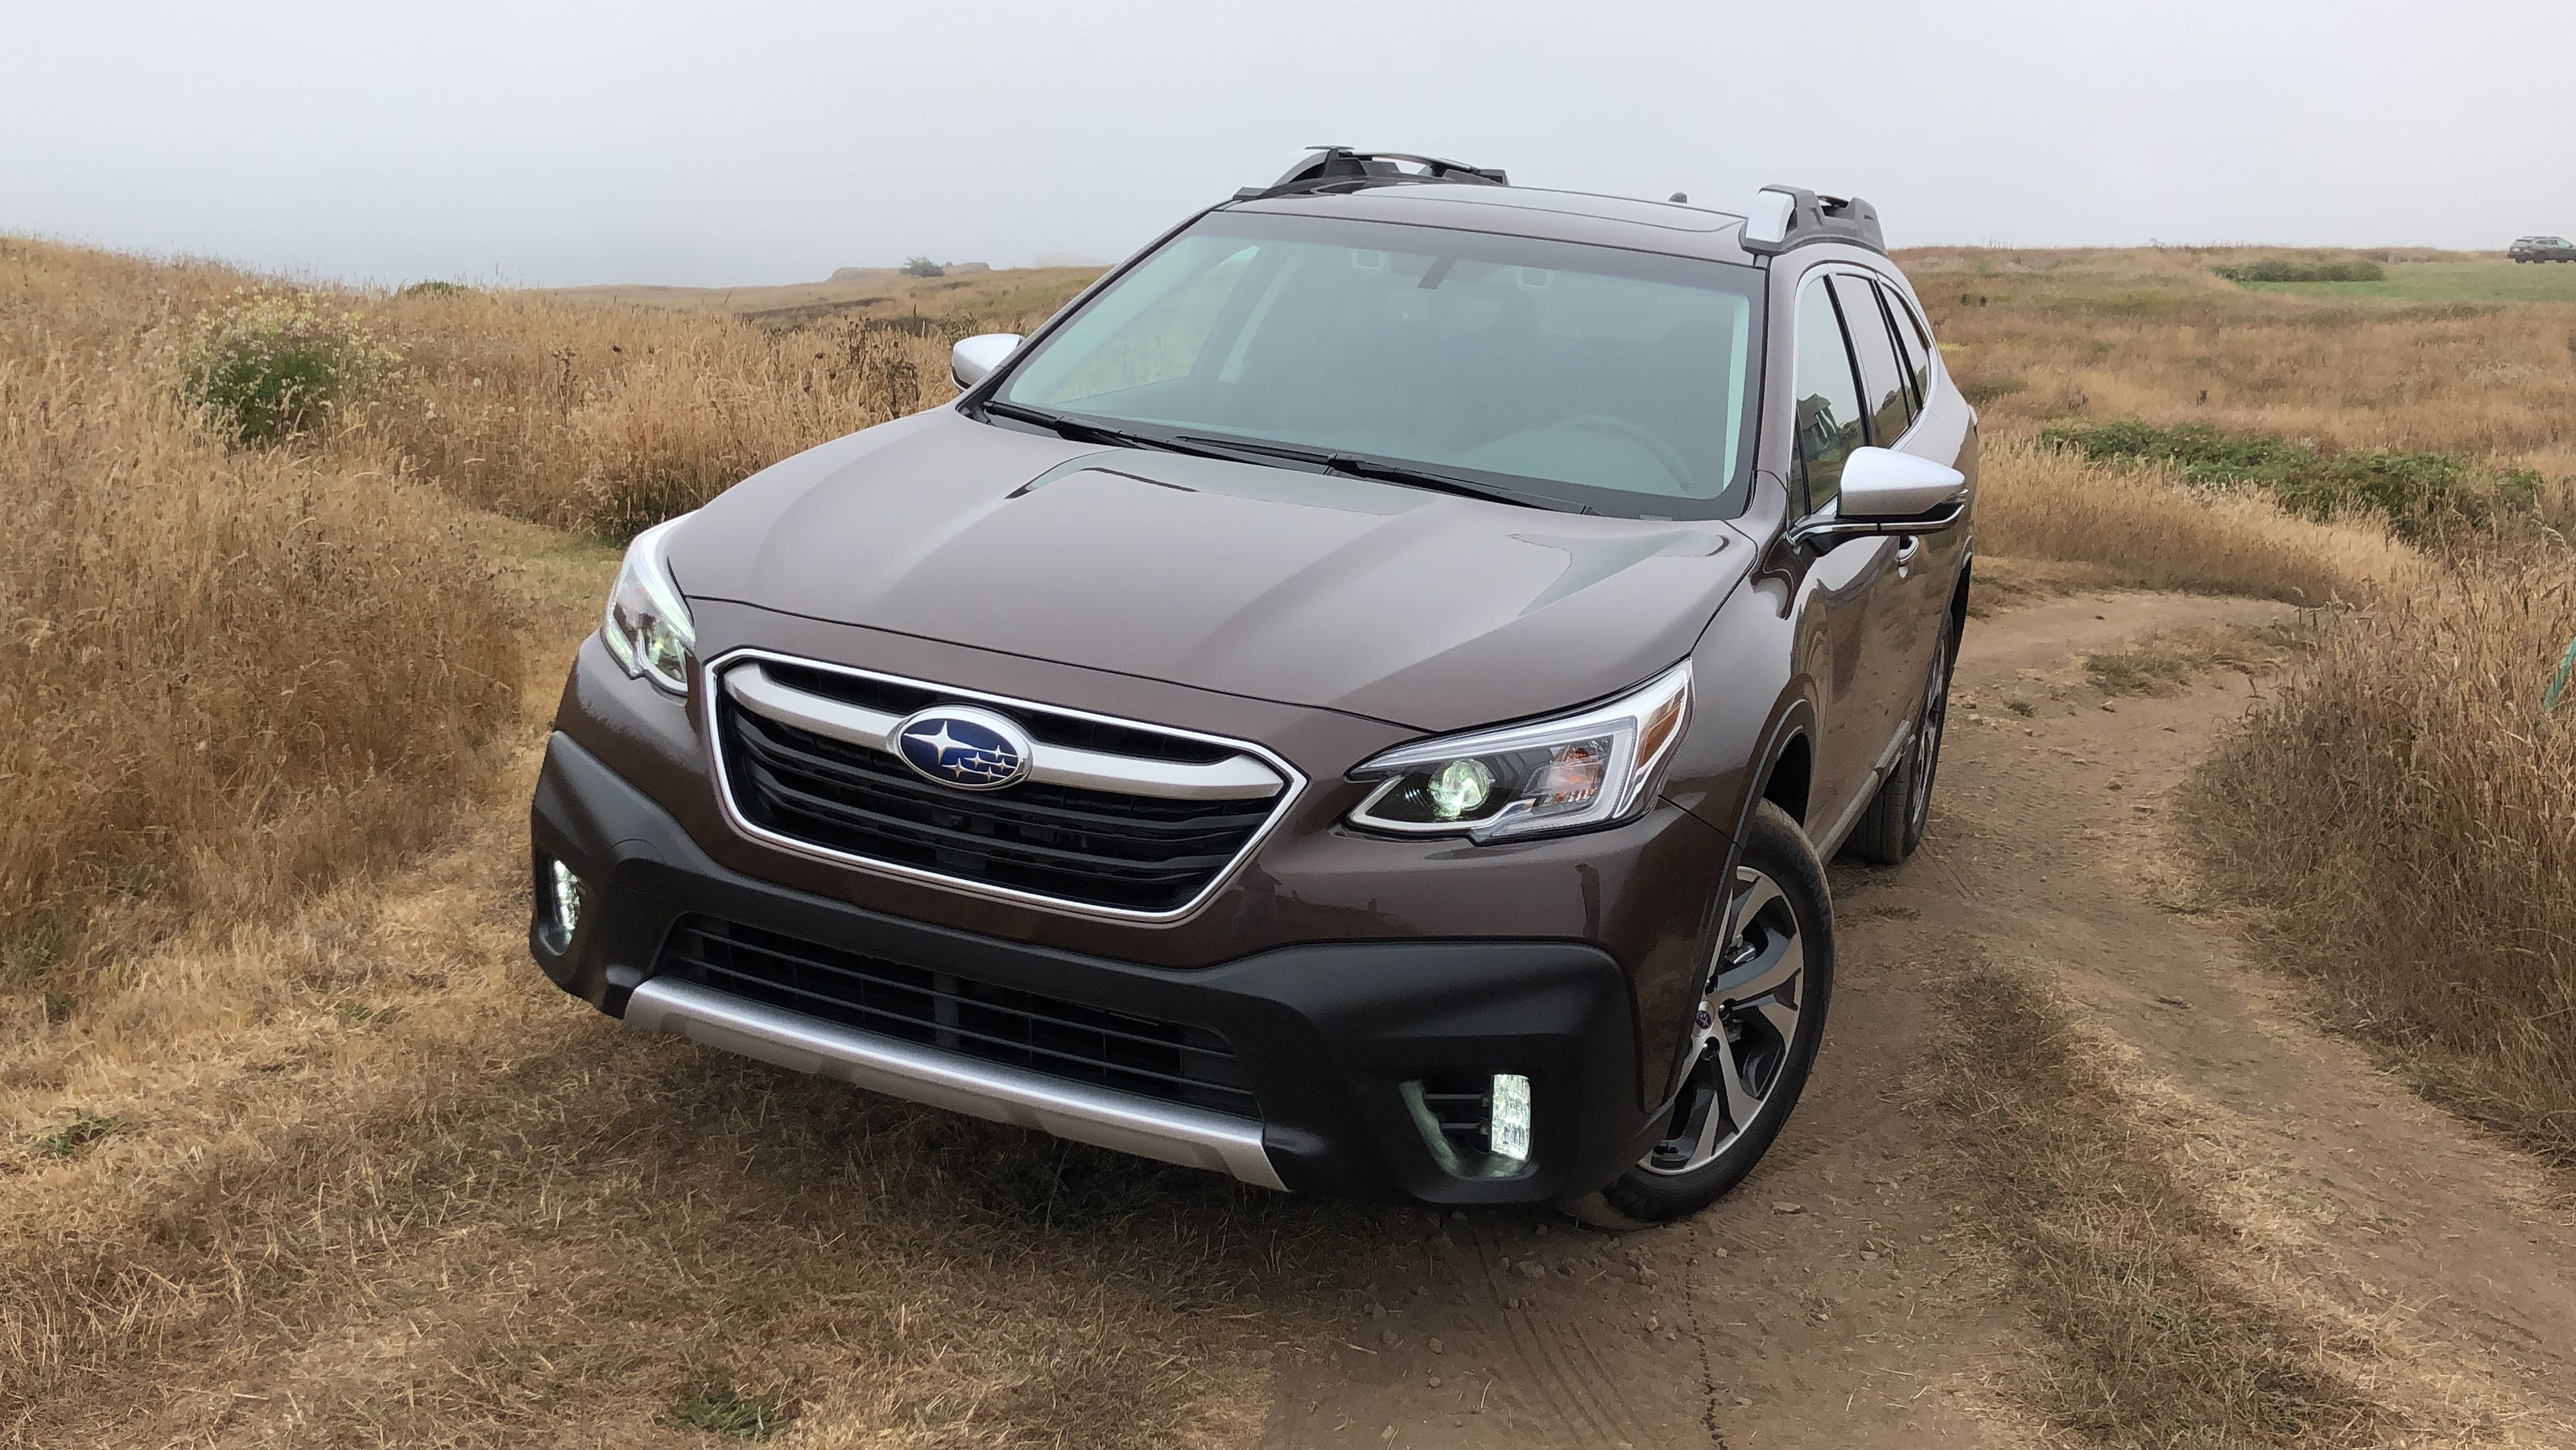 First drive: 2020 Subaru Outback wins with value, safety, features